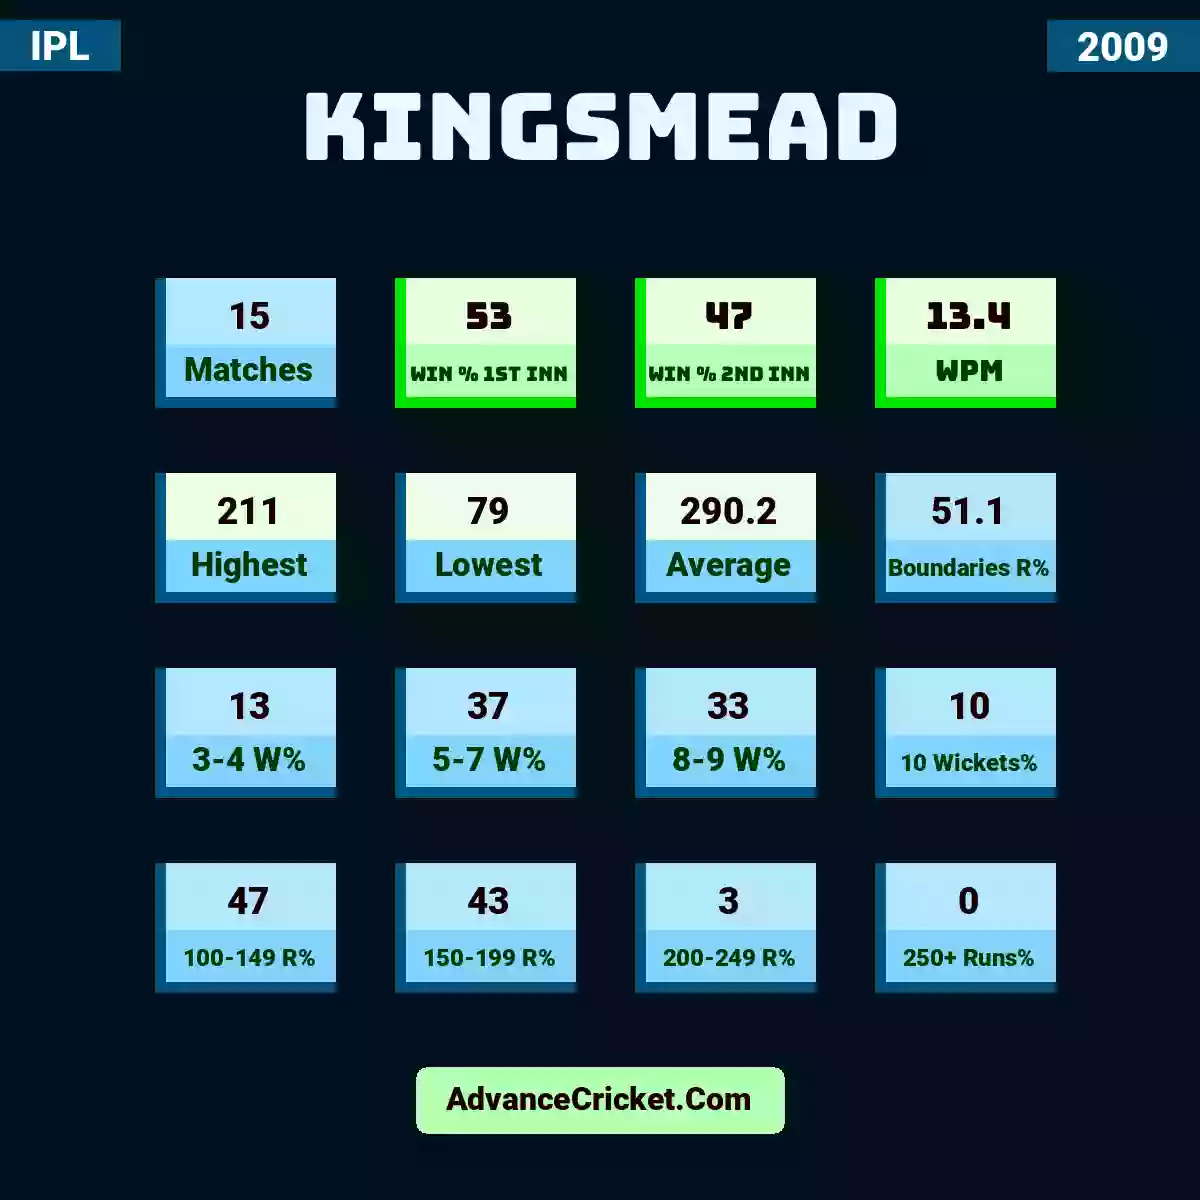 Image showing Kingsmead with Matches: 15, Win % 1st Inn: 53, Win % 2nd Inn: 47, WPM: 13.4, Highest: 211, Lowest: 79, Average: 290.2, Boundaries R%: 51.1, 3-4 W%: 13, 5-7 W%: 37, 8-9 W%: 33, 10 Wickets%: 10, 100-149 R%: 47, 150-199 R%: 43, 200-249 R%: 3, 250+ Runs%: 0.